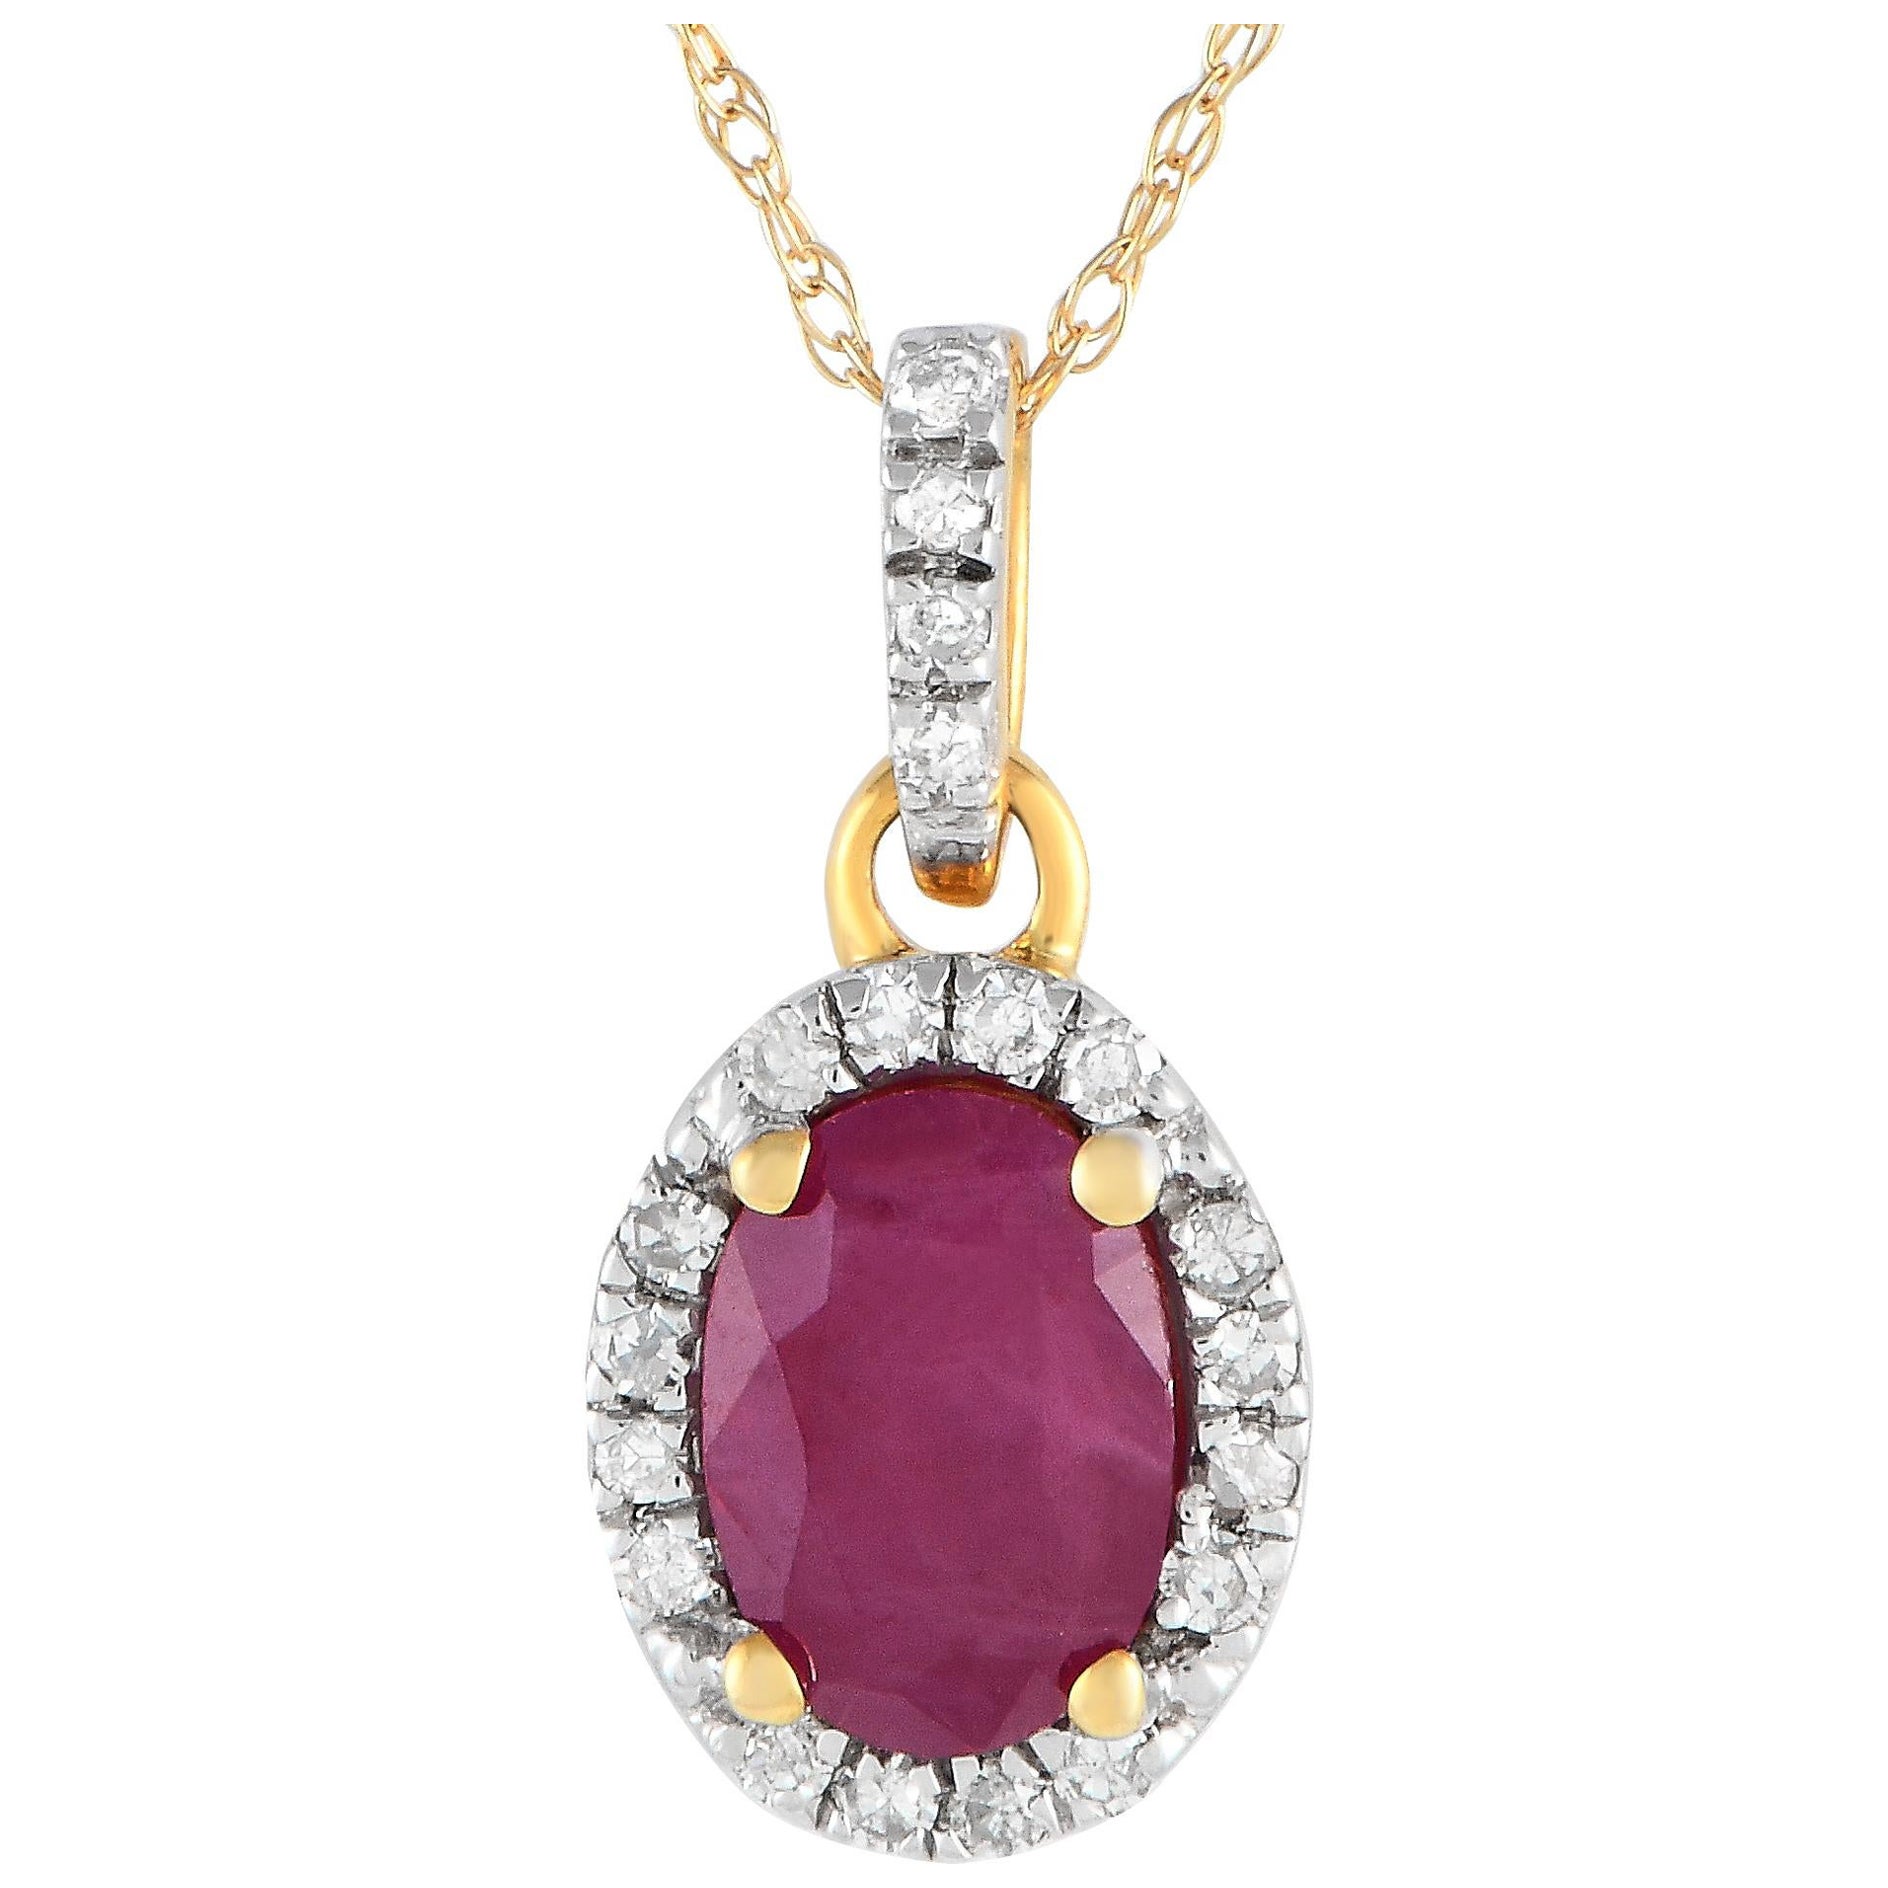 LB Exclusive 14K Yellow Gold 0.10ct Diamond & Ruby Pendant Necklace PD4-16075YRU For Sale